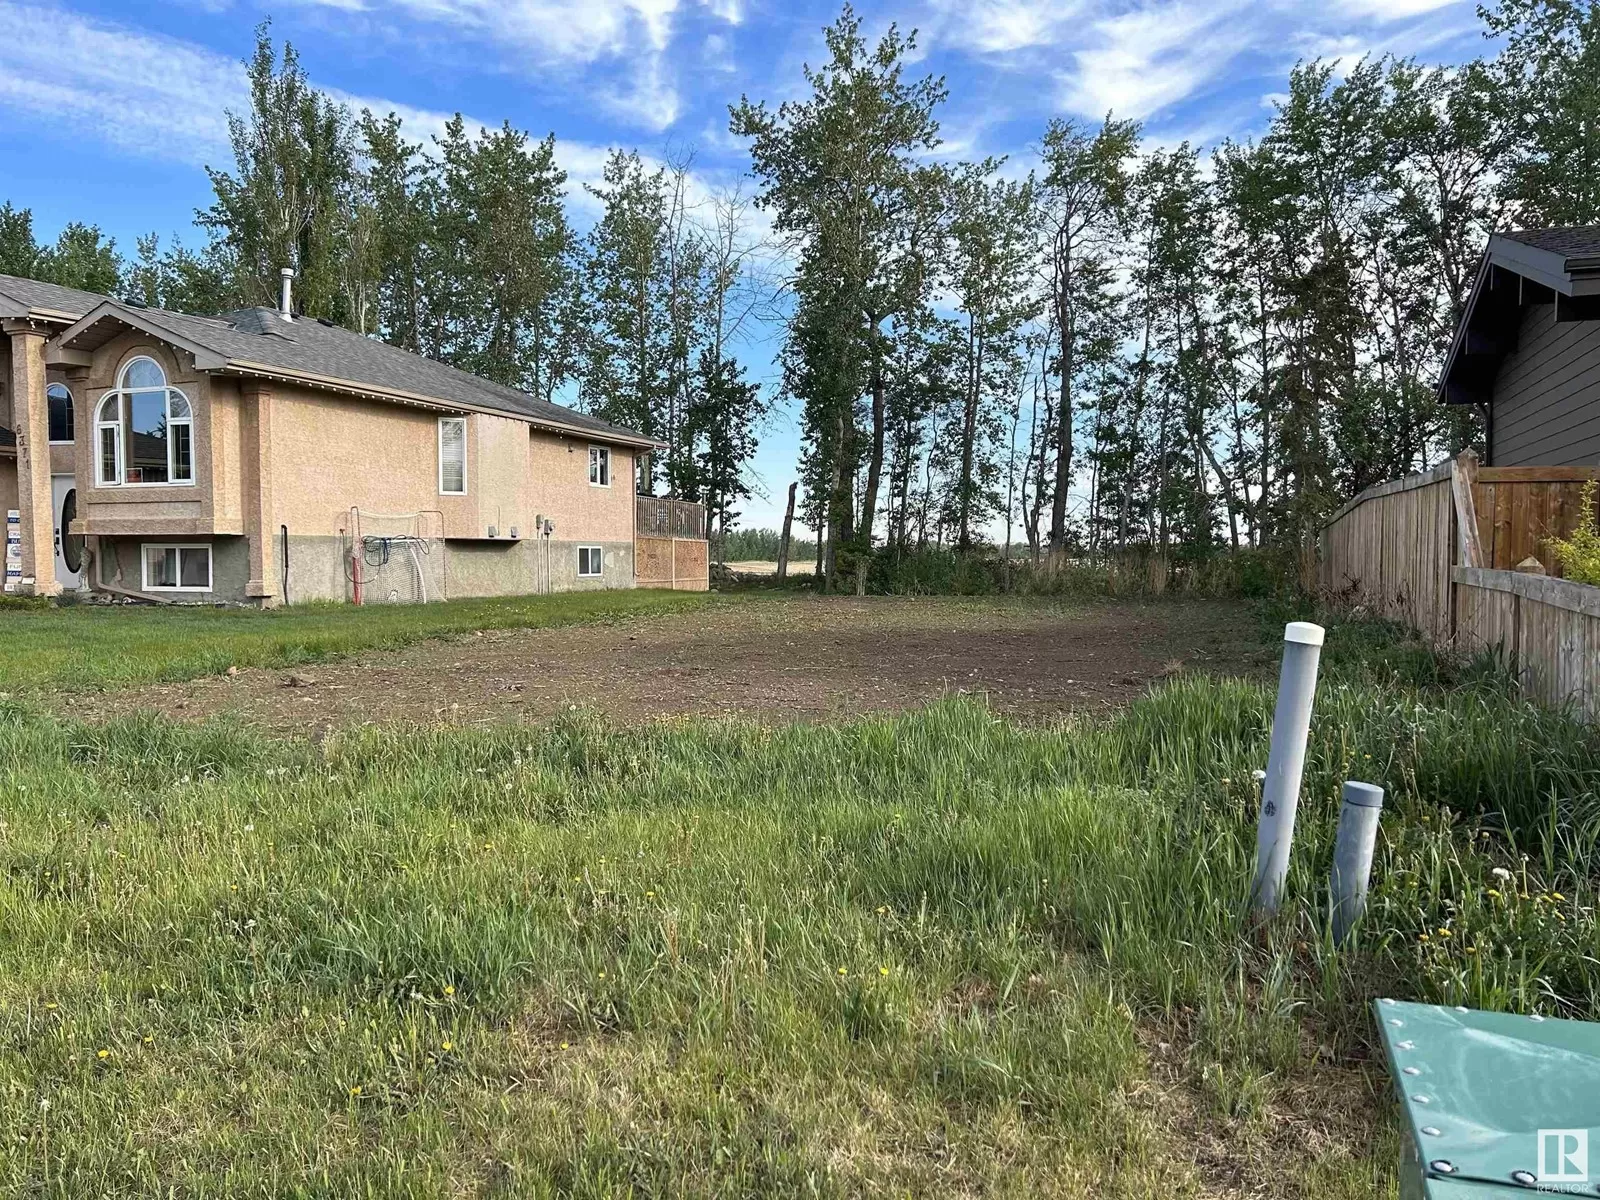 No Building for rent: 6367 53a Av, Redwater, Alberta T0A 2W0